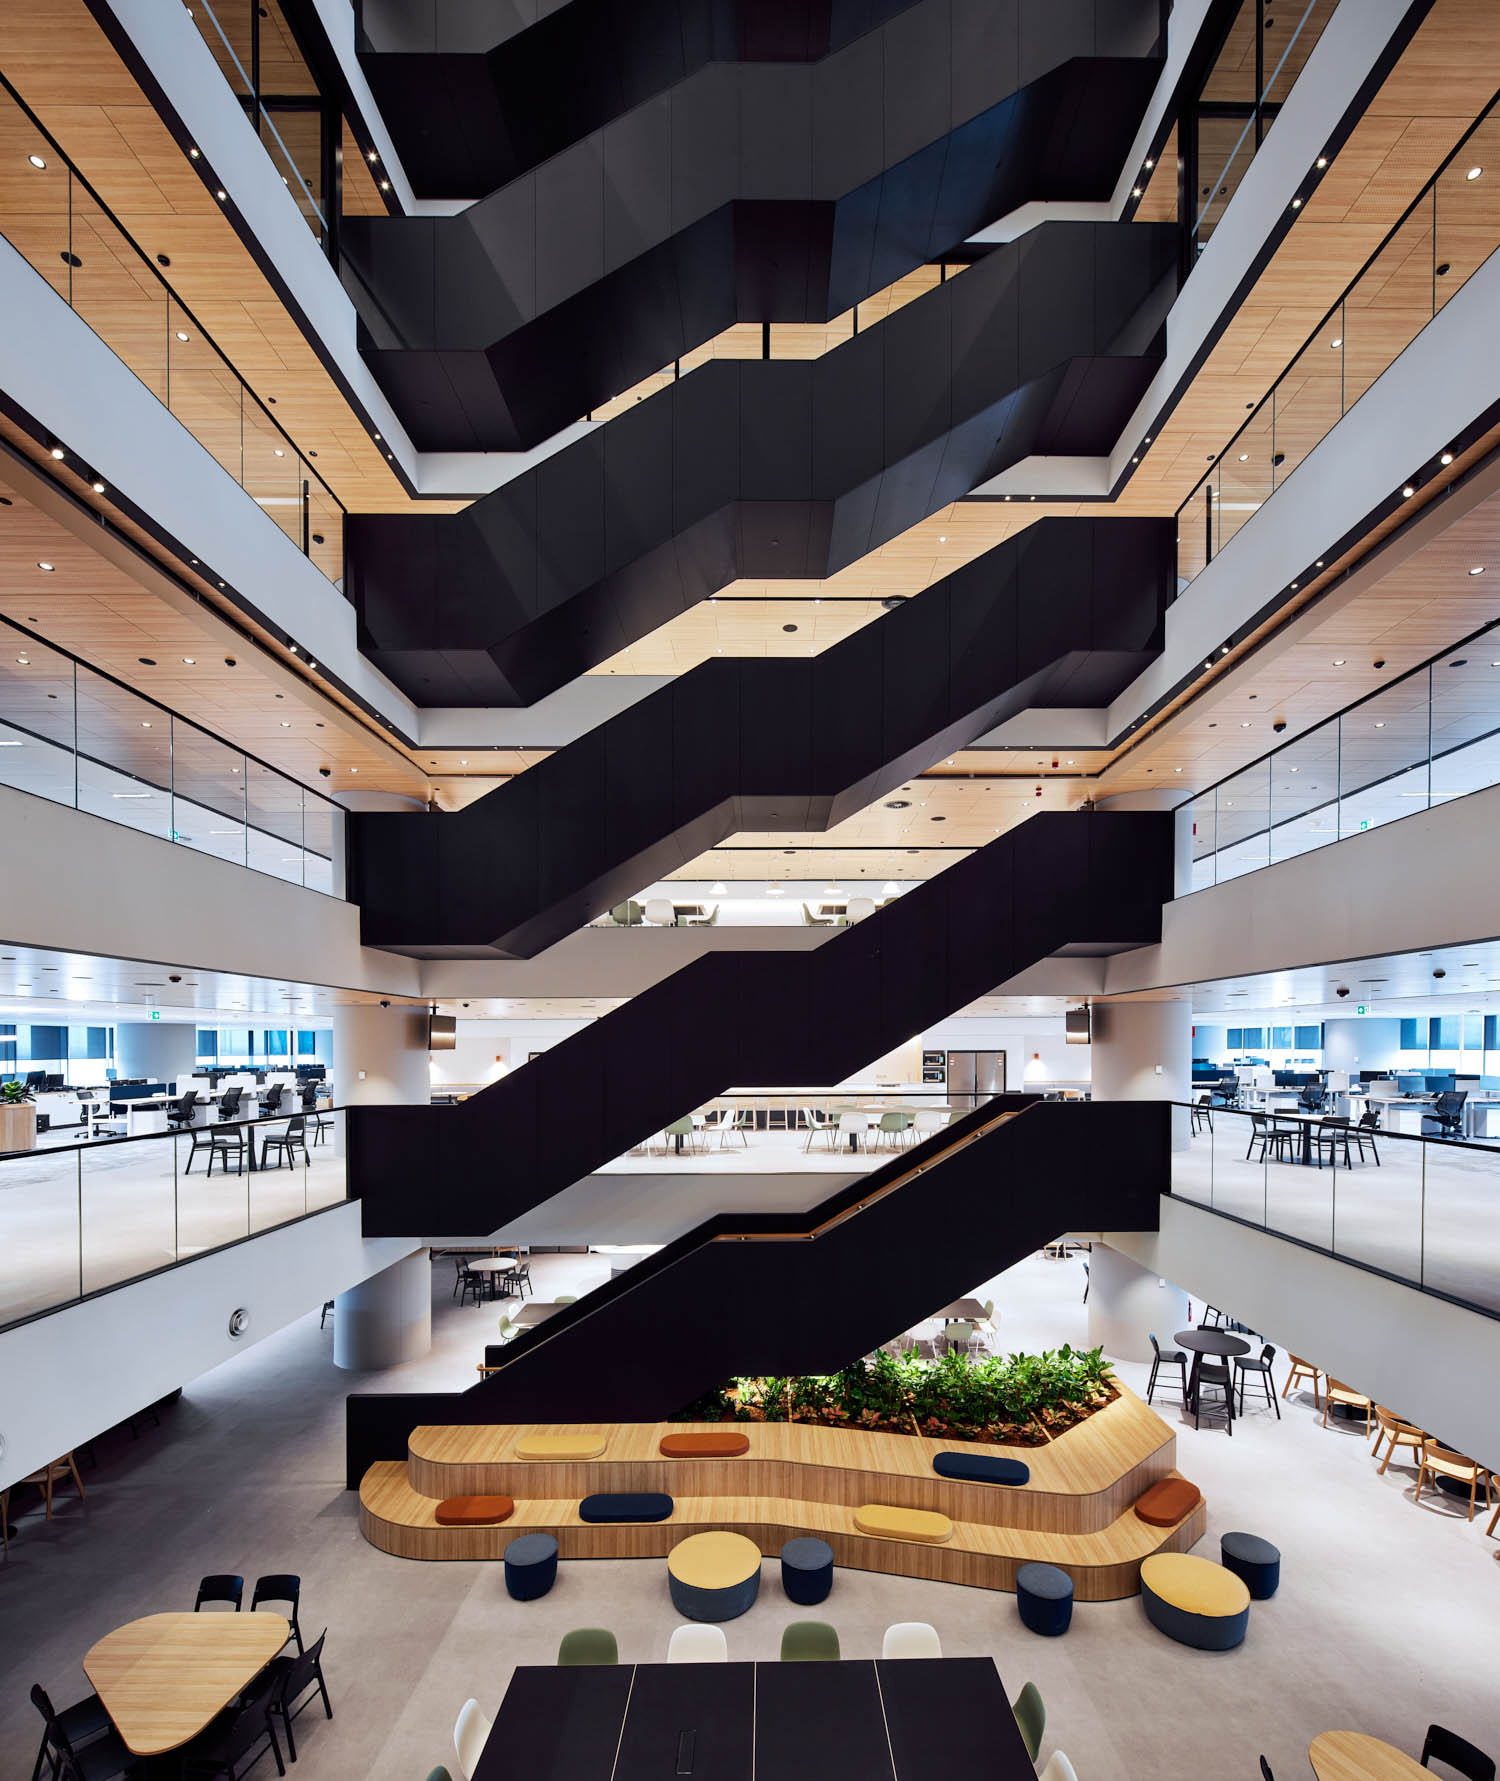 The open tenancy stair defines the atrium while connecting the headquarters’ seven floors.